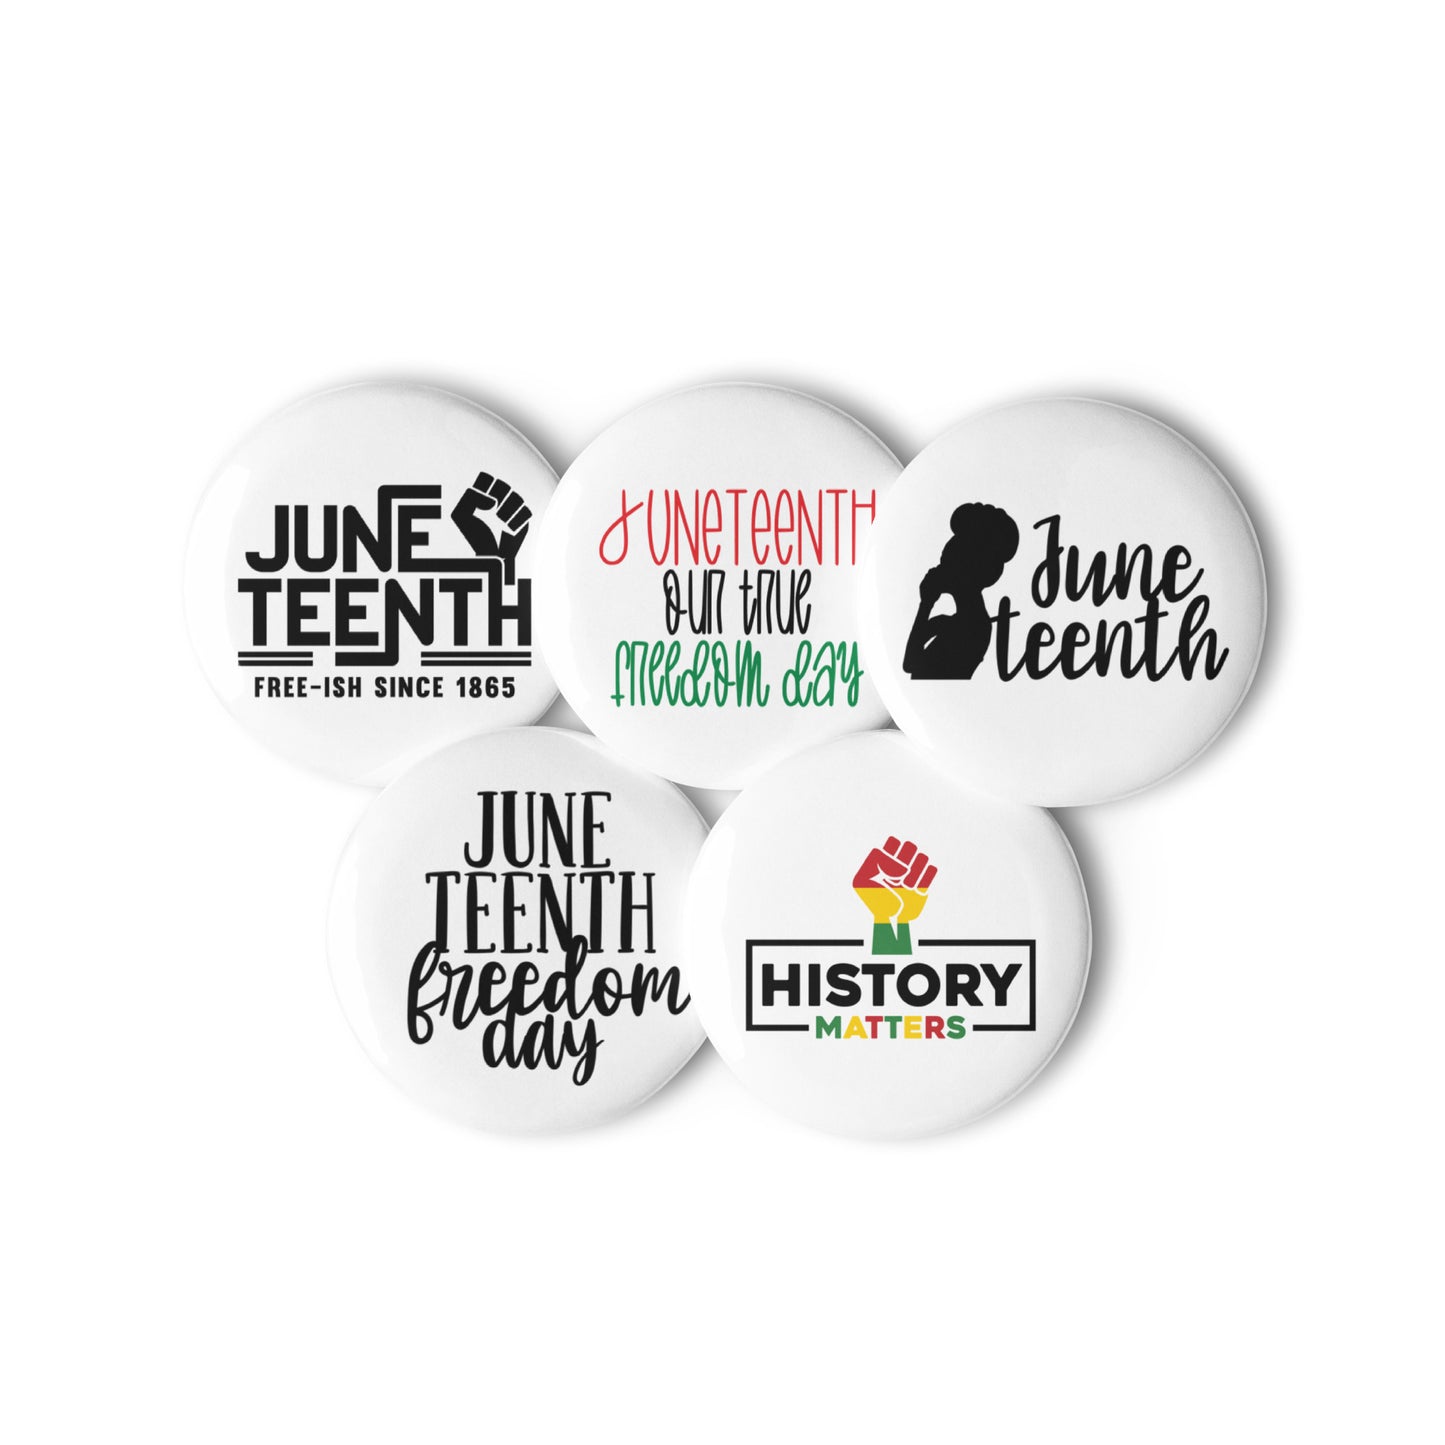 Juneteenth Freedom Set of pin buttons